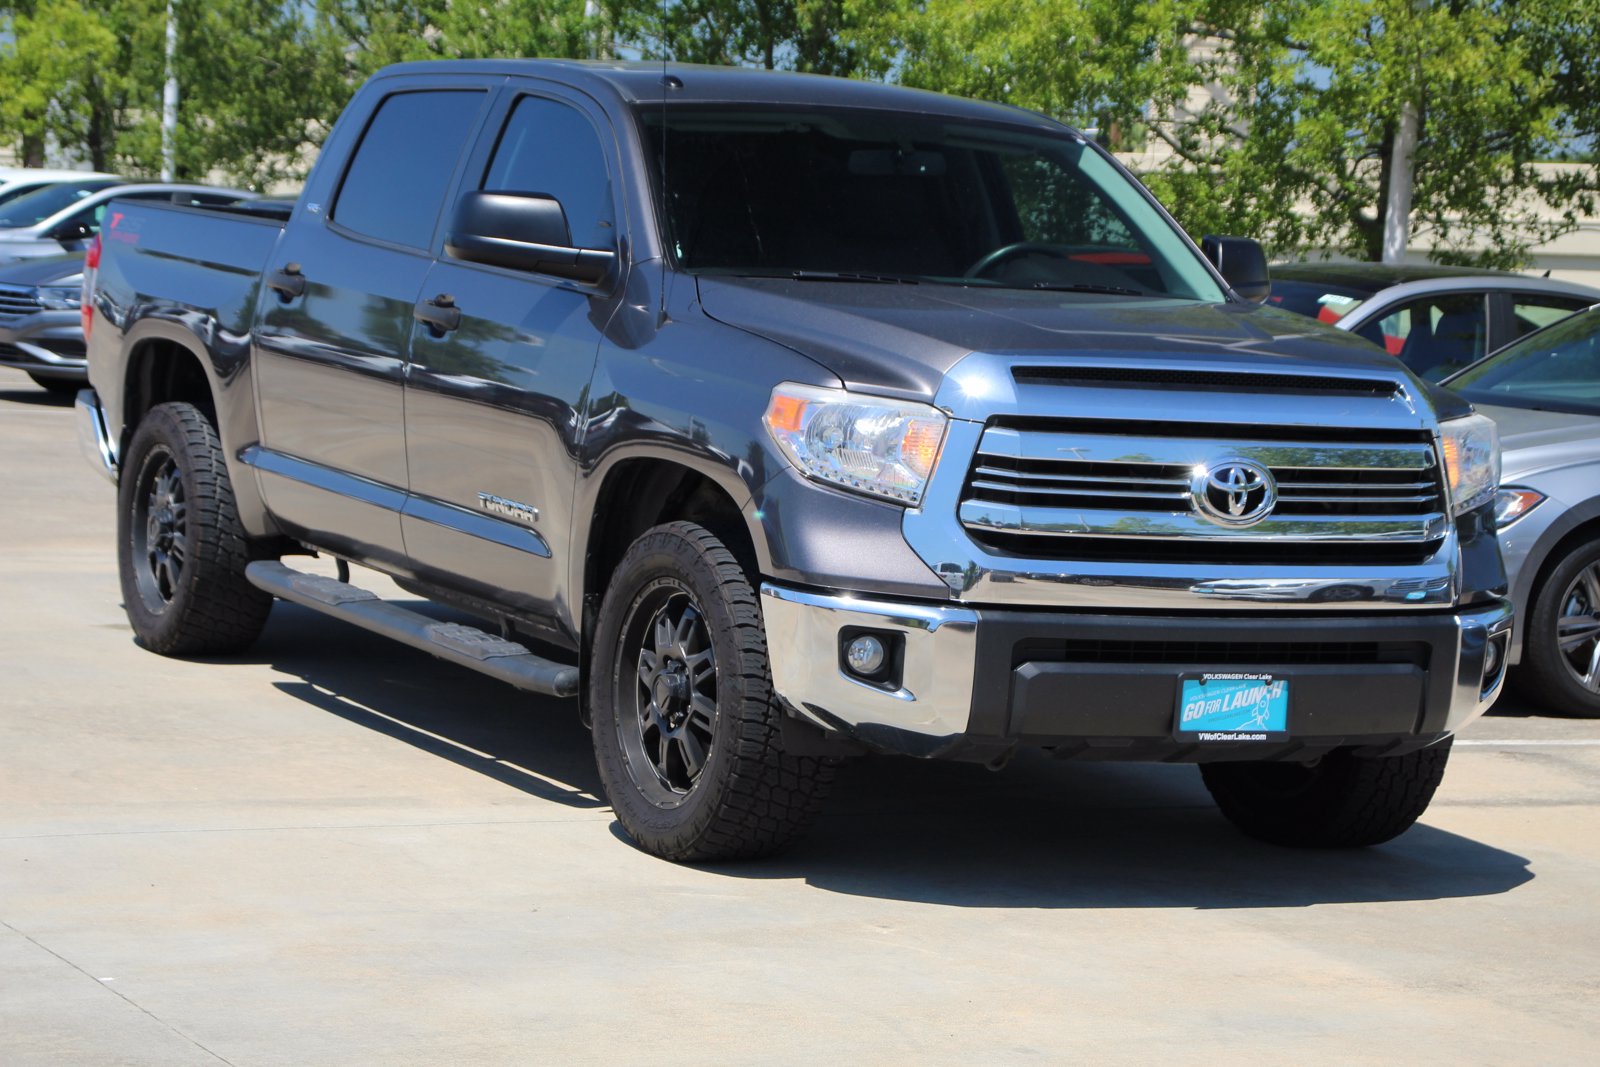 Pre-Owned 2016 Toyota Tundra 2WD Truck SR5 Crew Cab Pickup in Houston #